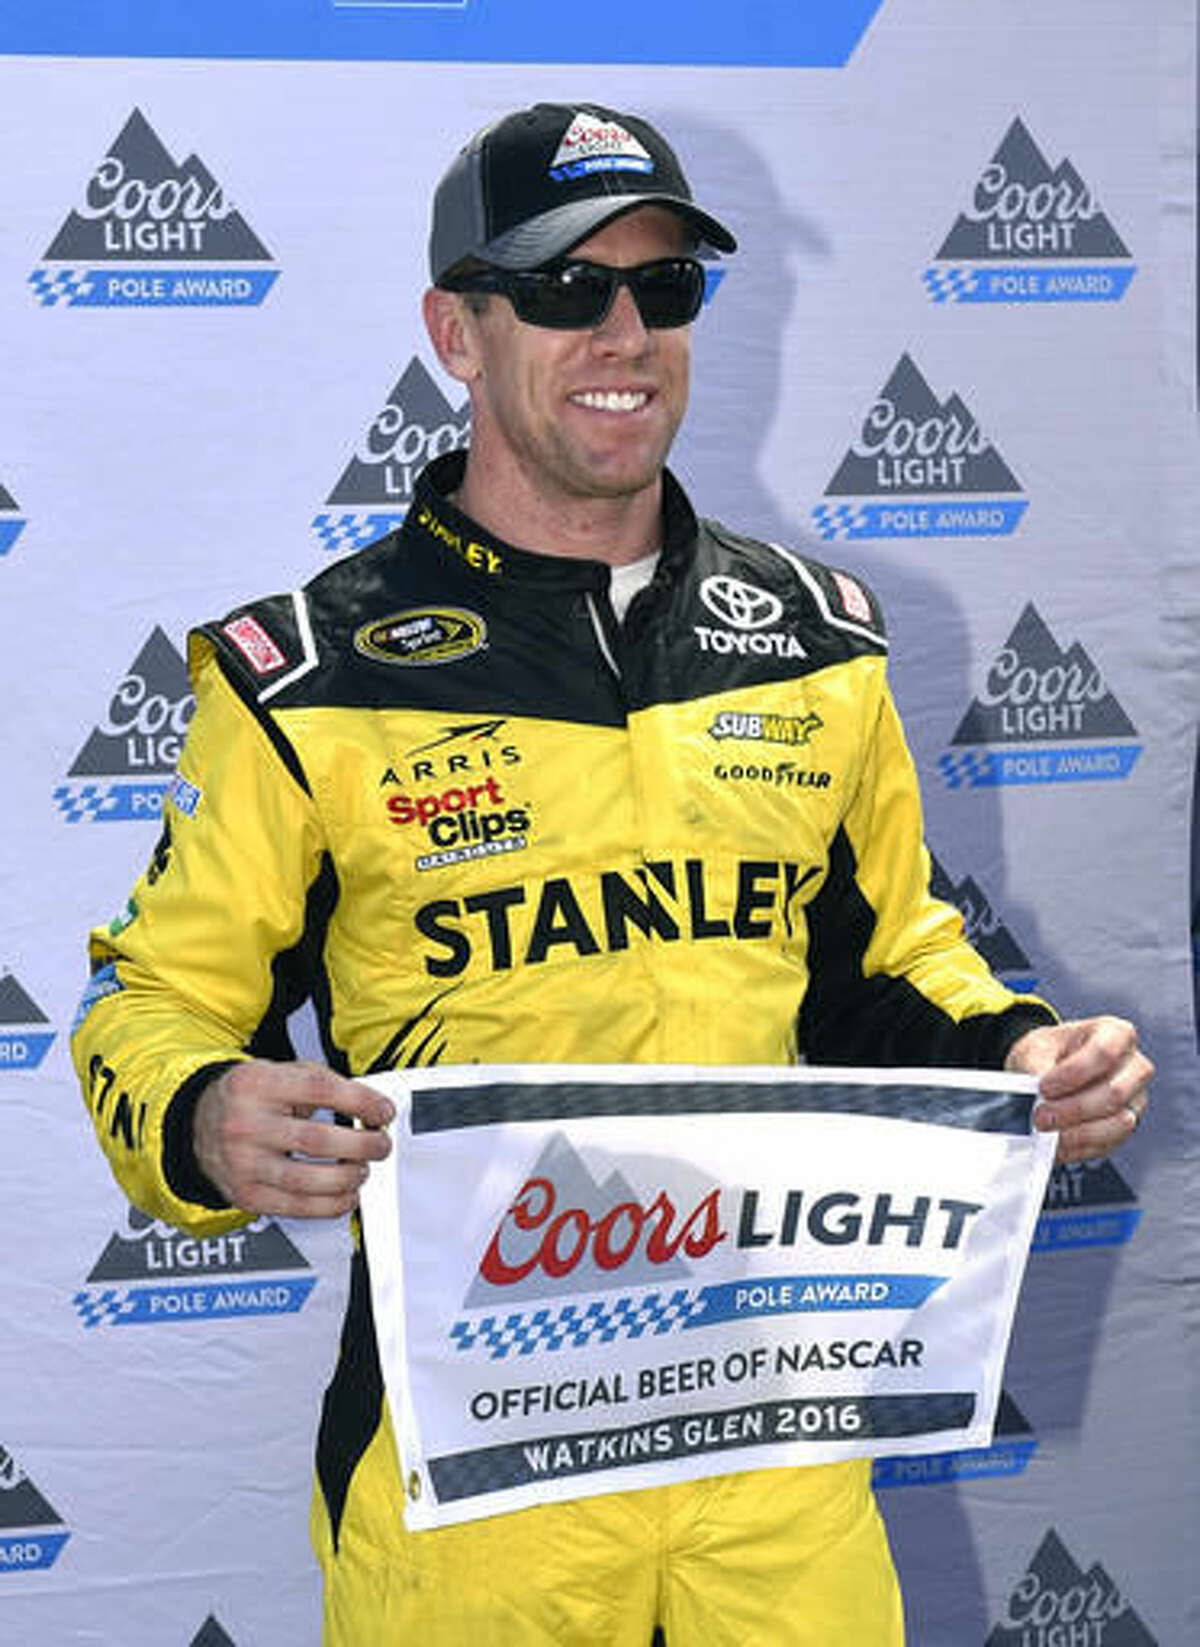 Carl Edwards poses with the pole award after qualifying for Sunday's NASCAR Sprint Cup series auto race at Watkins Glen International, Saturday, Aug. 6, 2016, in Watkins Glen, N.Y. (AP Photo/Derik Hamilton)